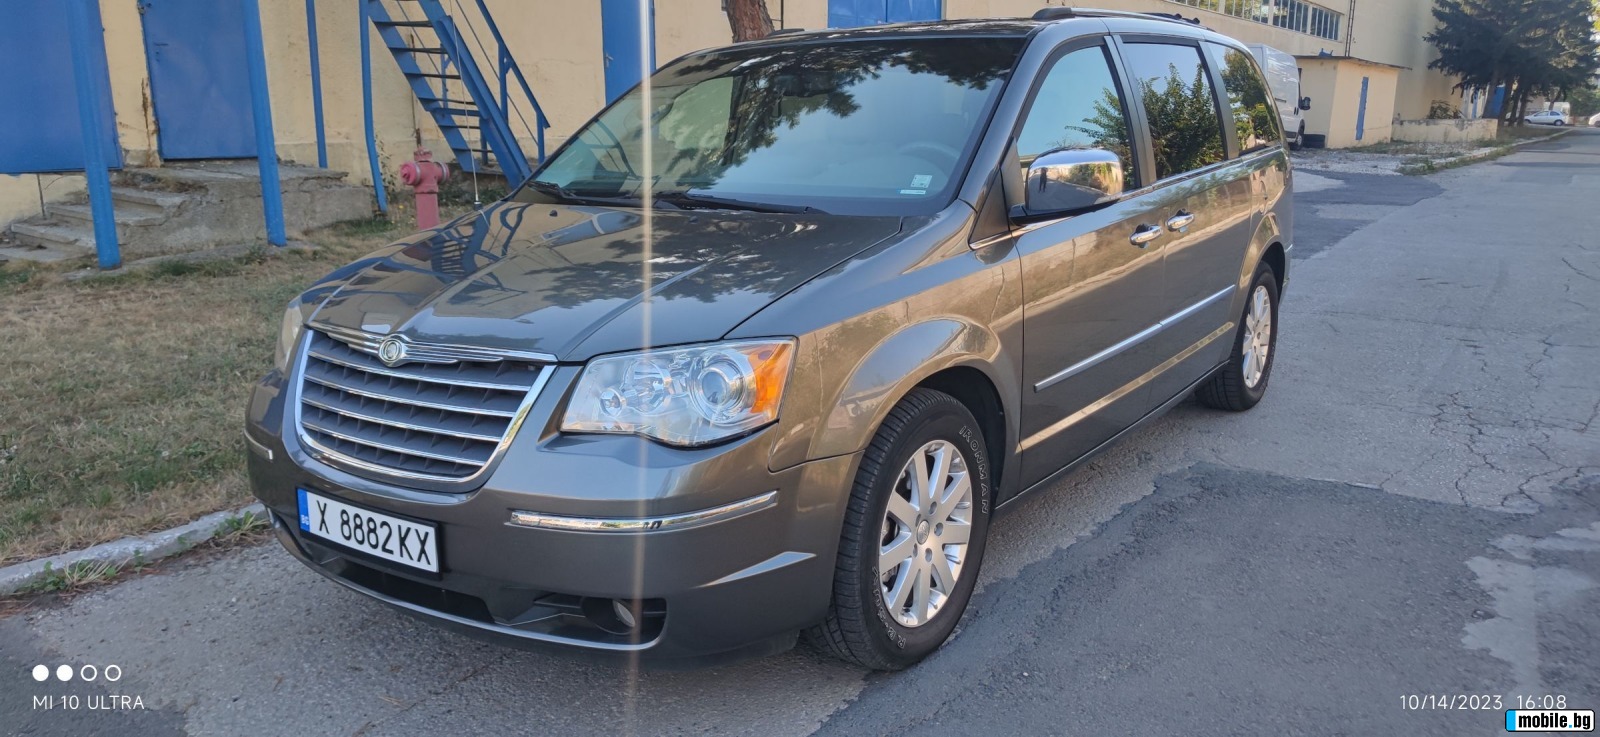 Chrysler Town and Country 4.0 Limited LPG | Mobile.bg   2